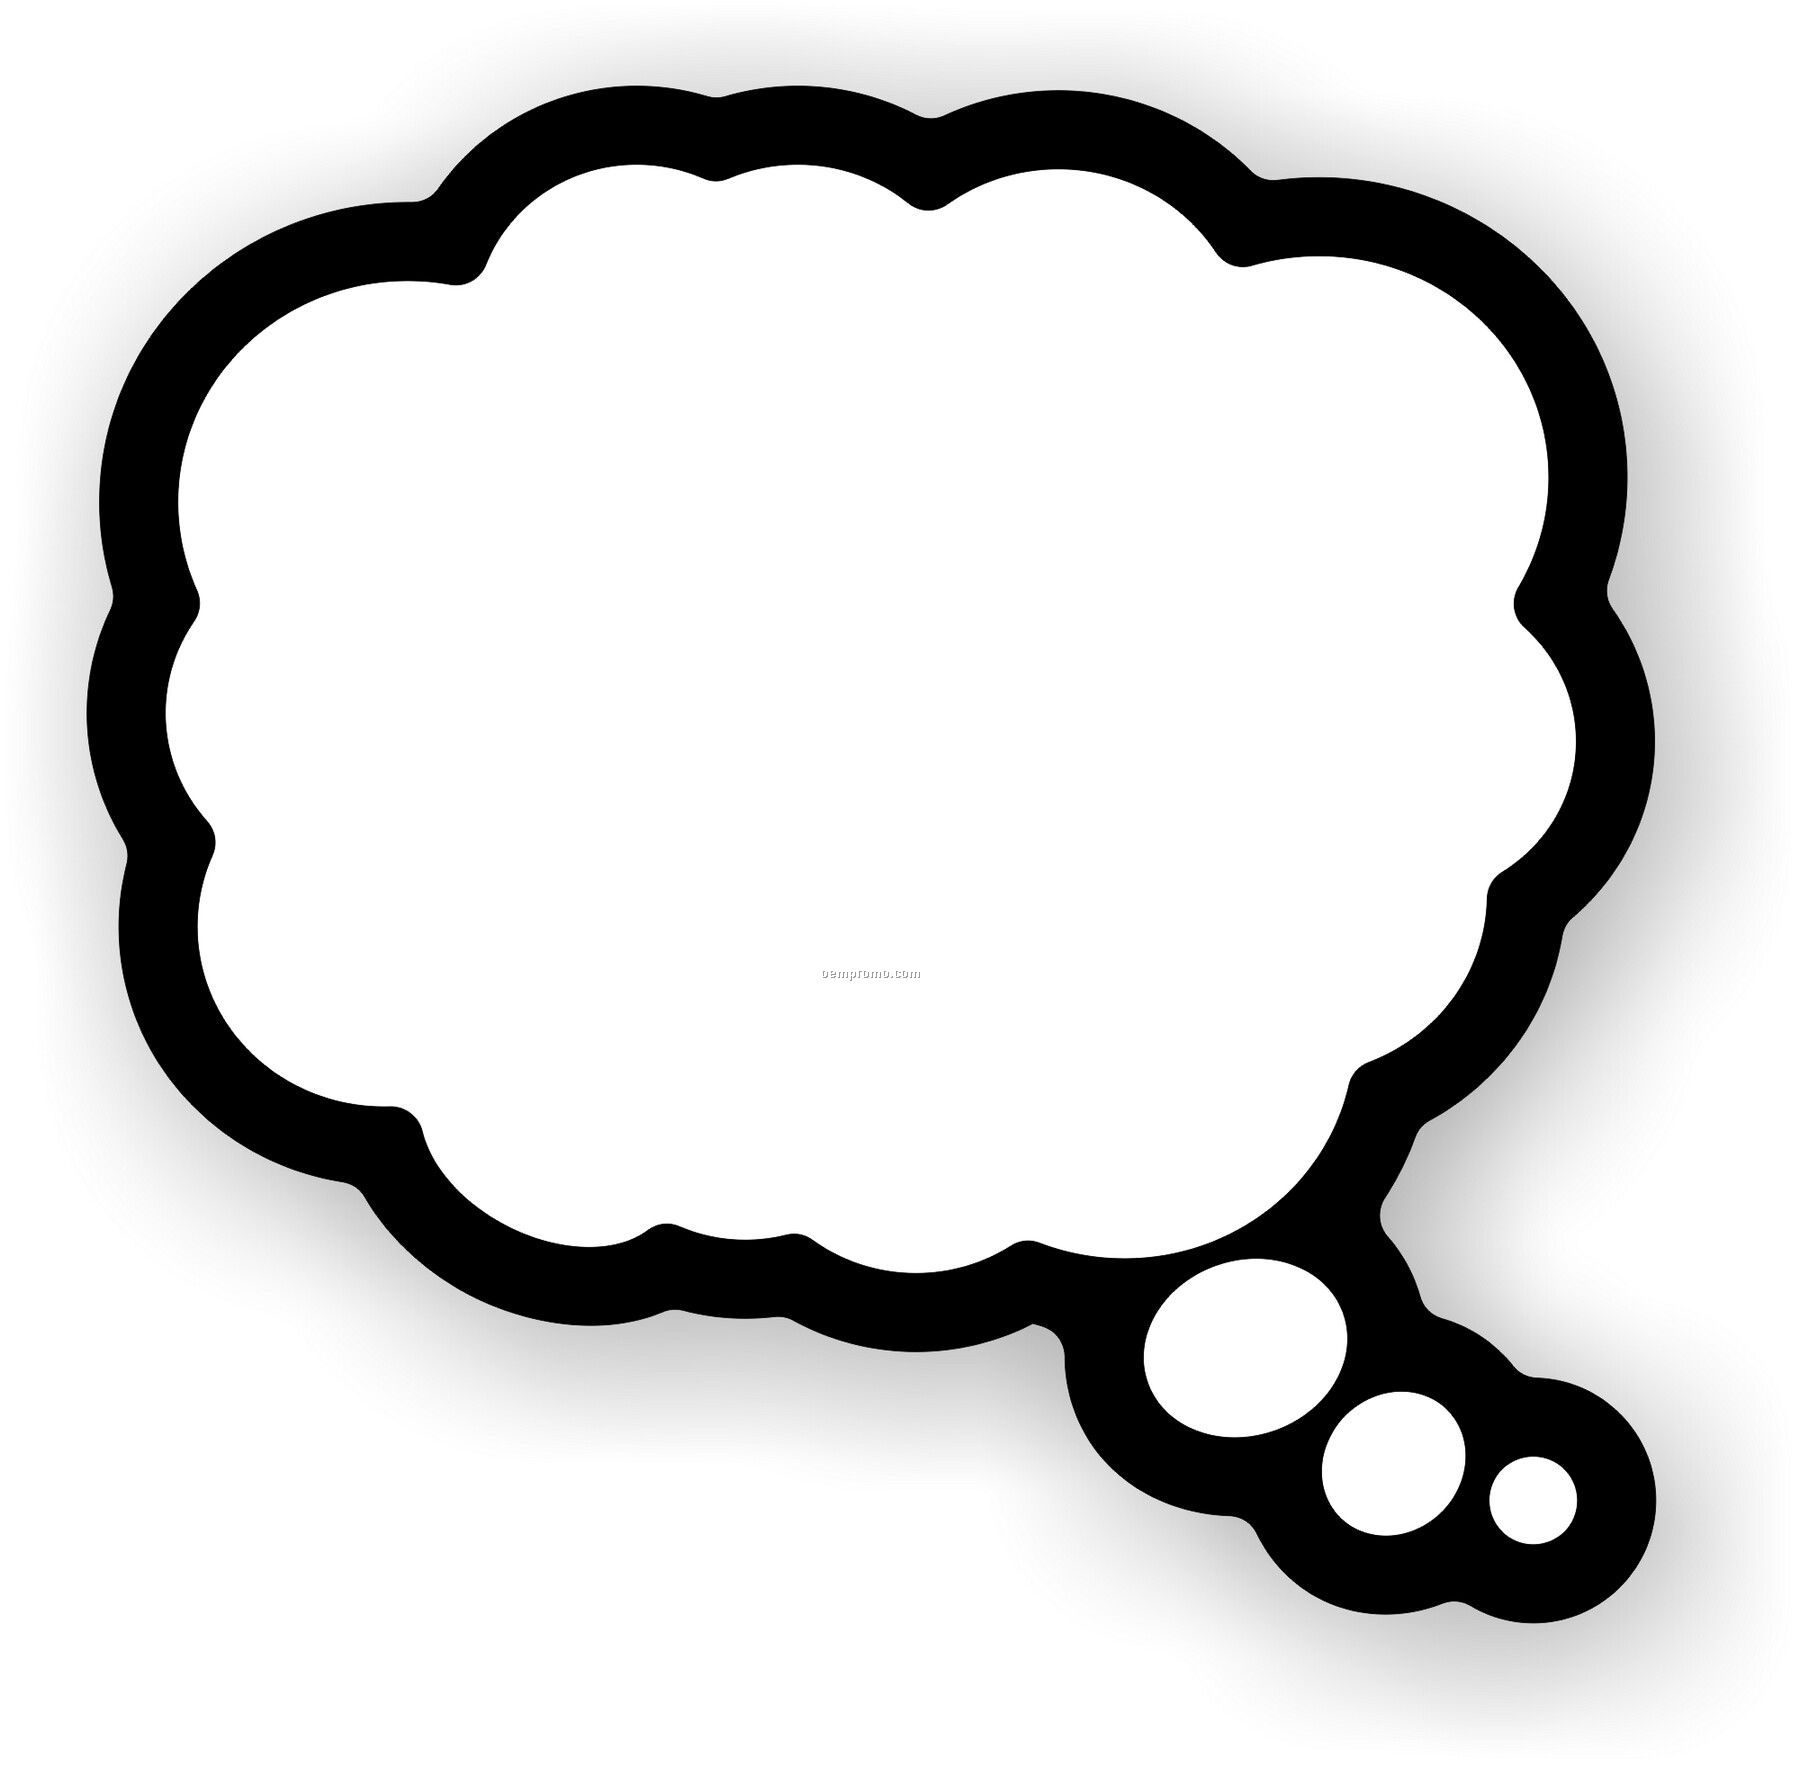 Person Thinking With Thought Bubble - Free Clipart ...